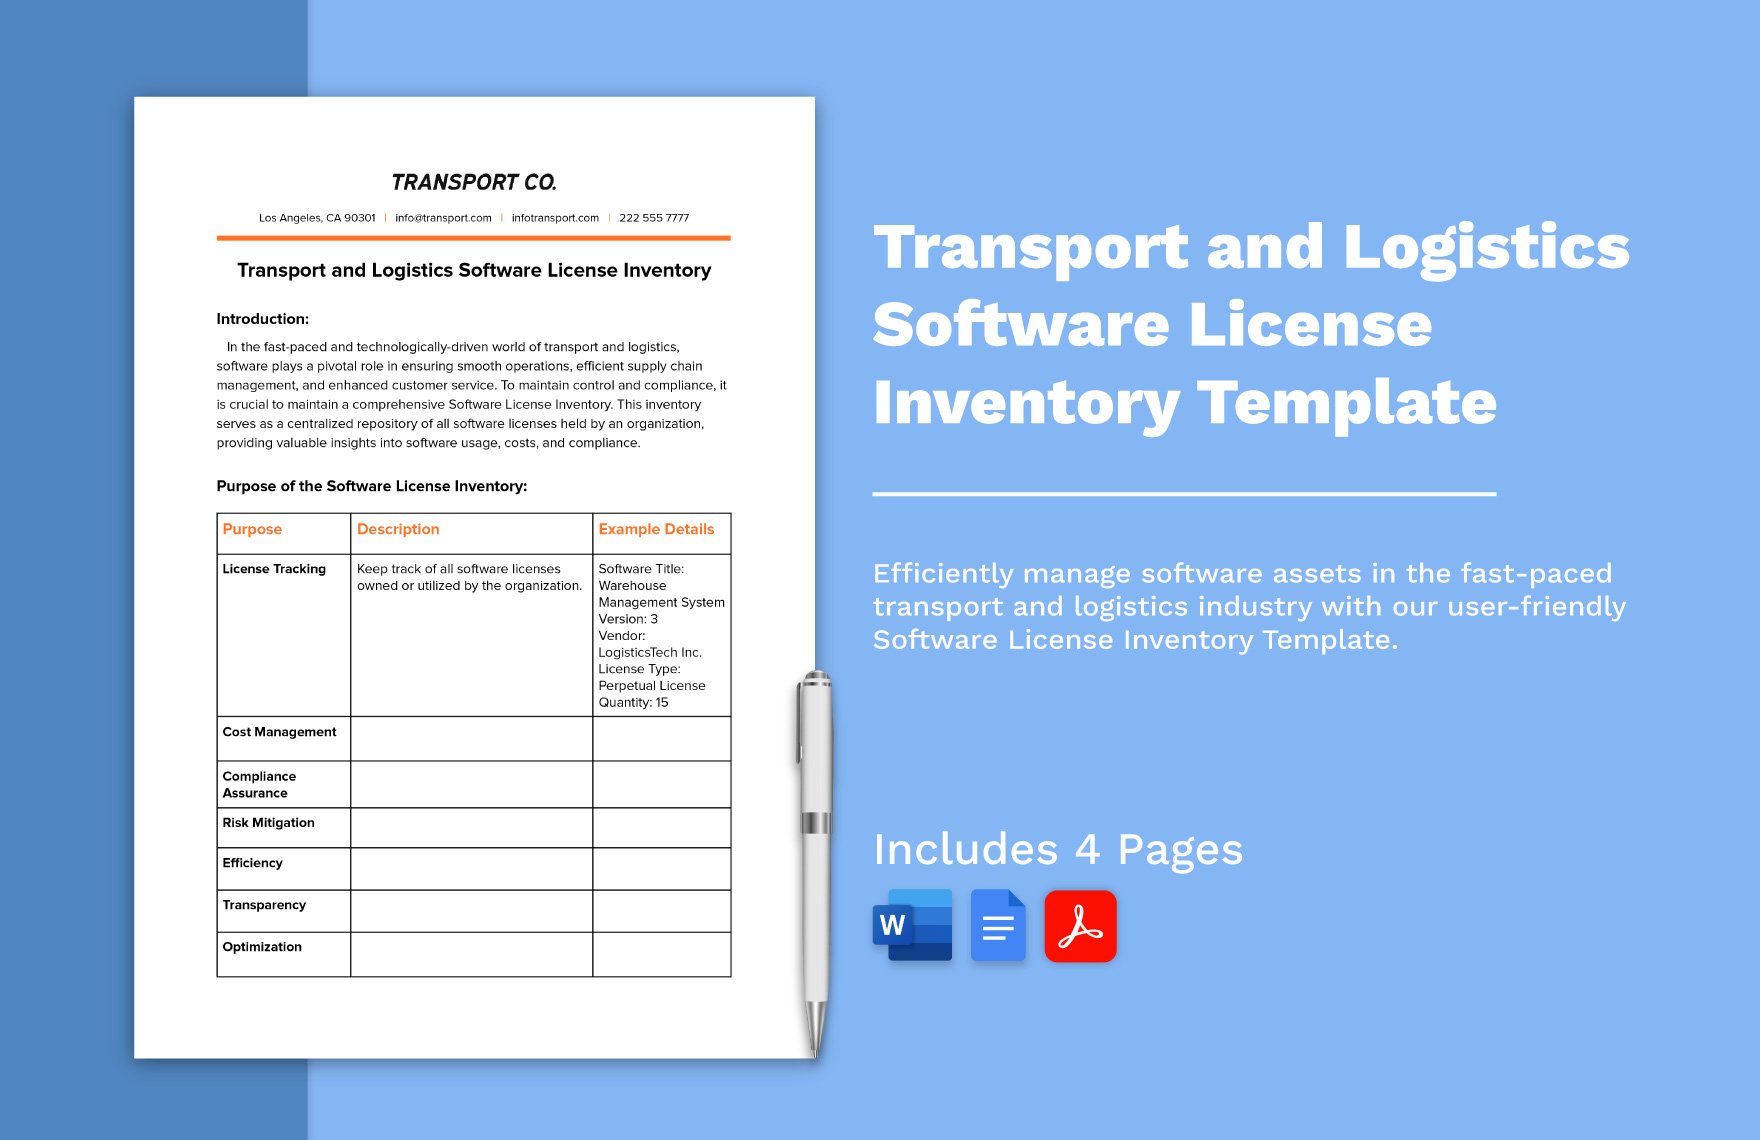 Transport and Logistics Software License Inventory Template